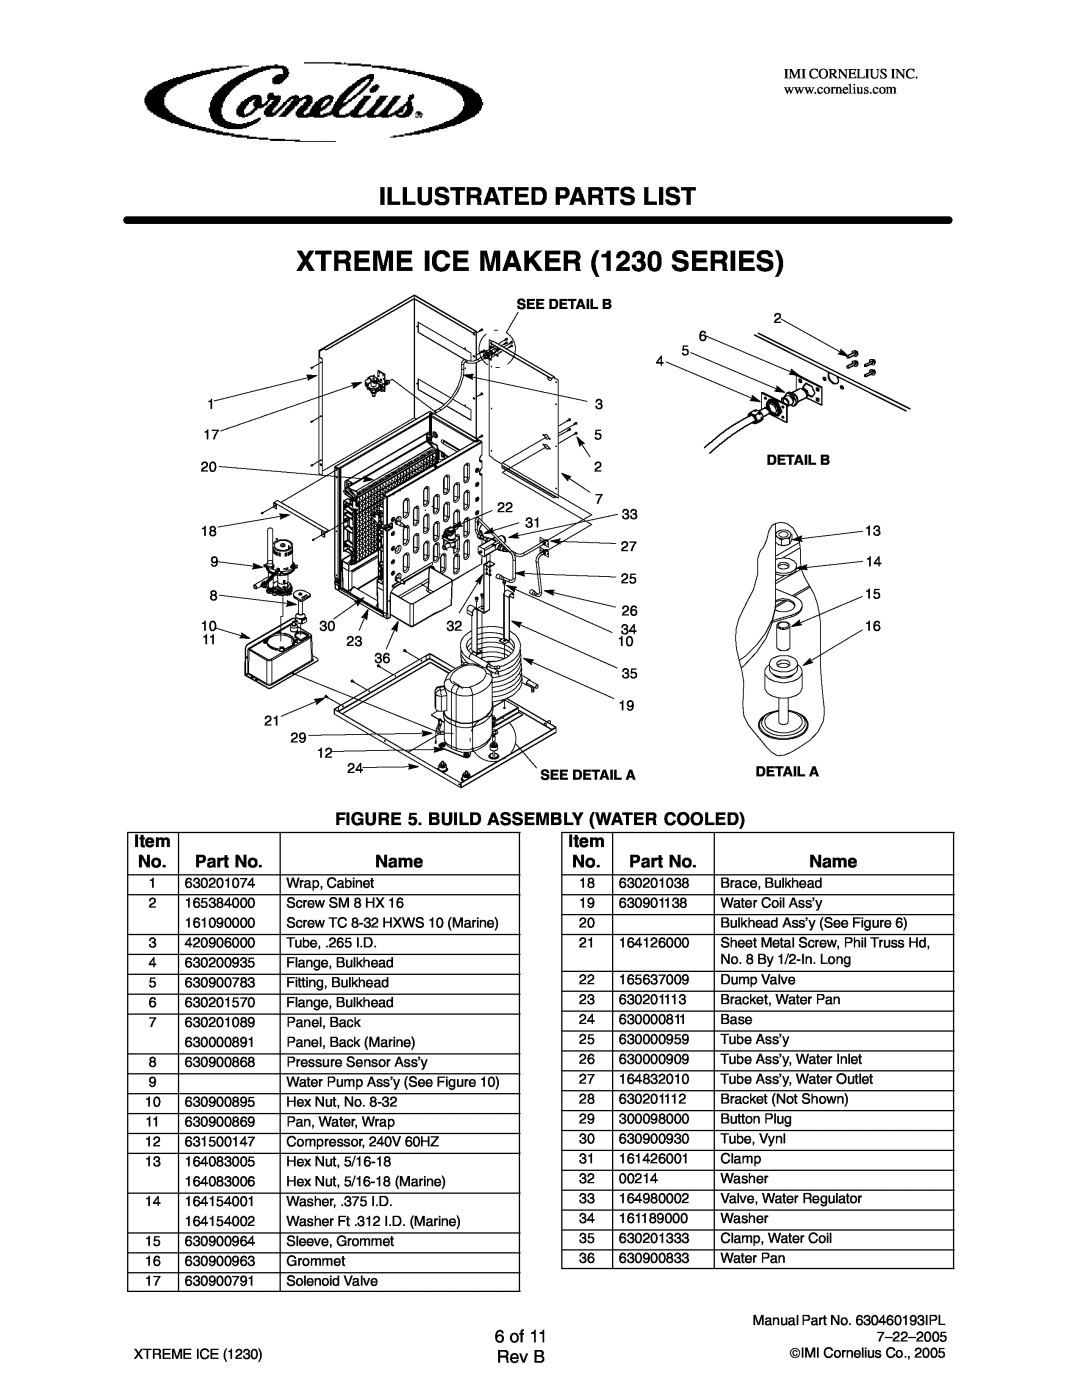 Cornelius 631812001 manual 6 of, XTREME ICE MAKER 1230 SERIES, Illustrated Parts List, Rev B, See Detail B, See Detail A 